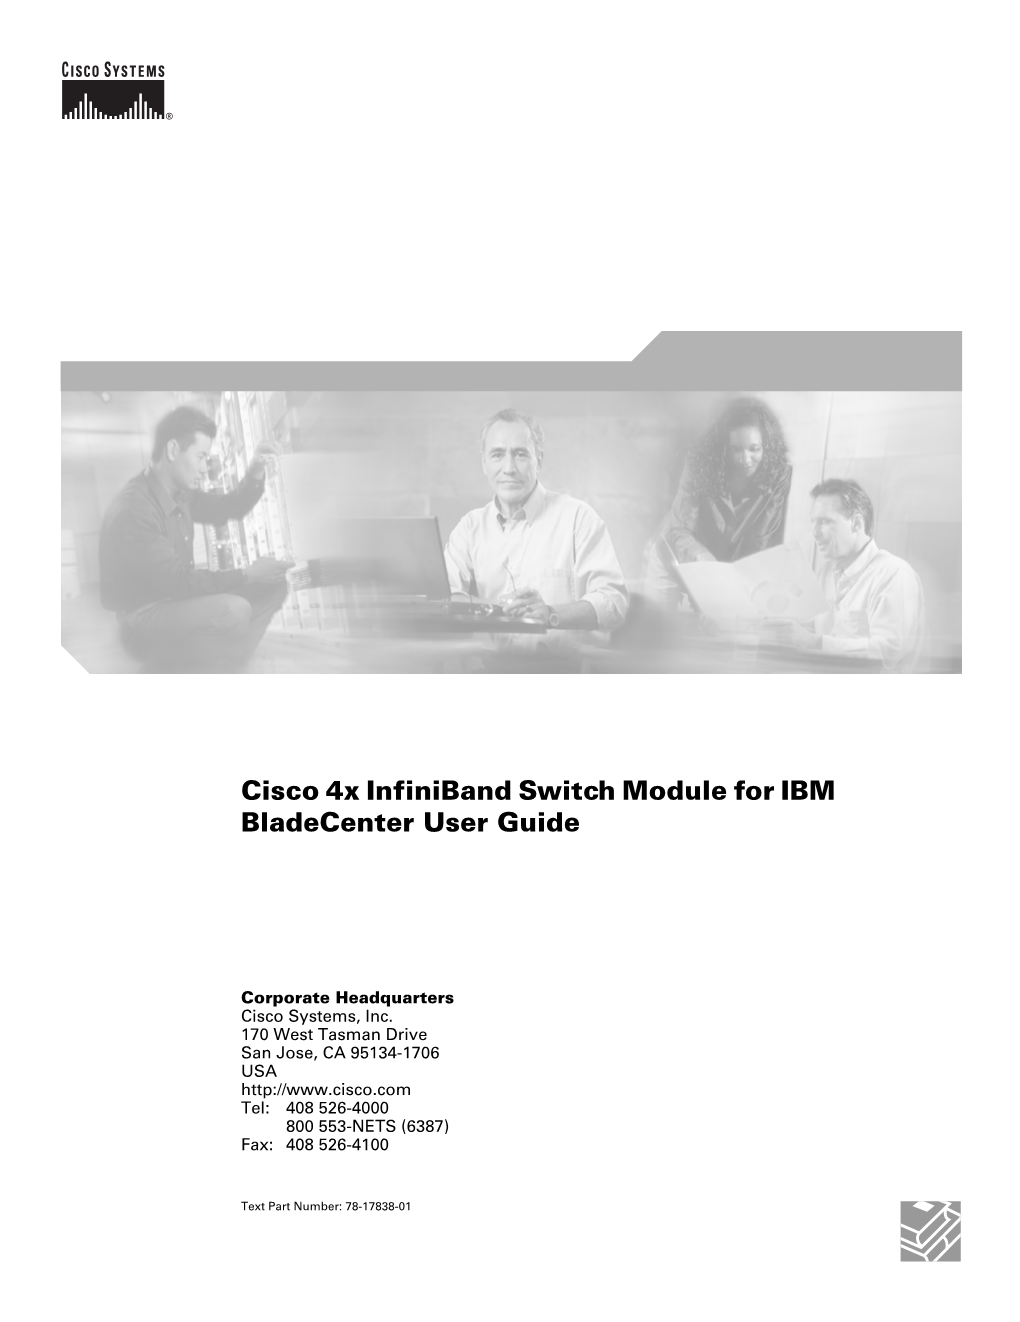 Cisco 4X Infiniband Switch Module for IBM Bladecenter User Guide